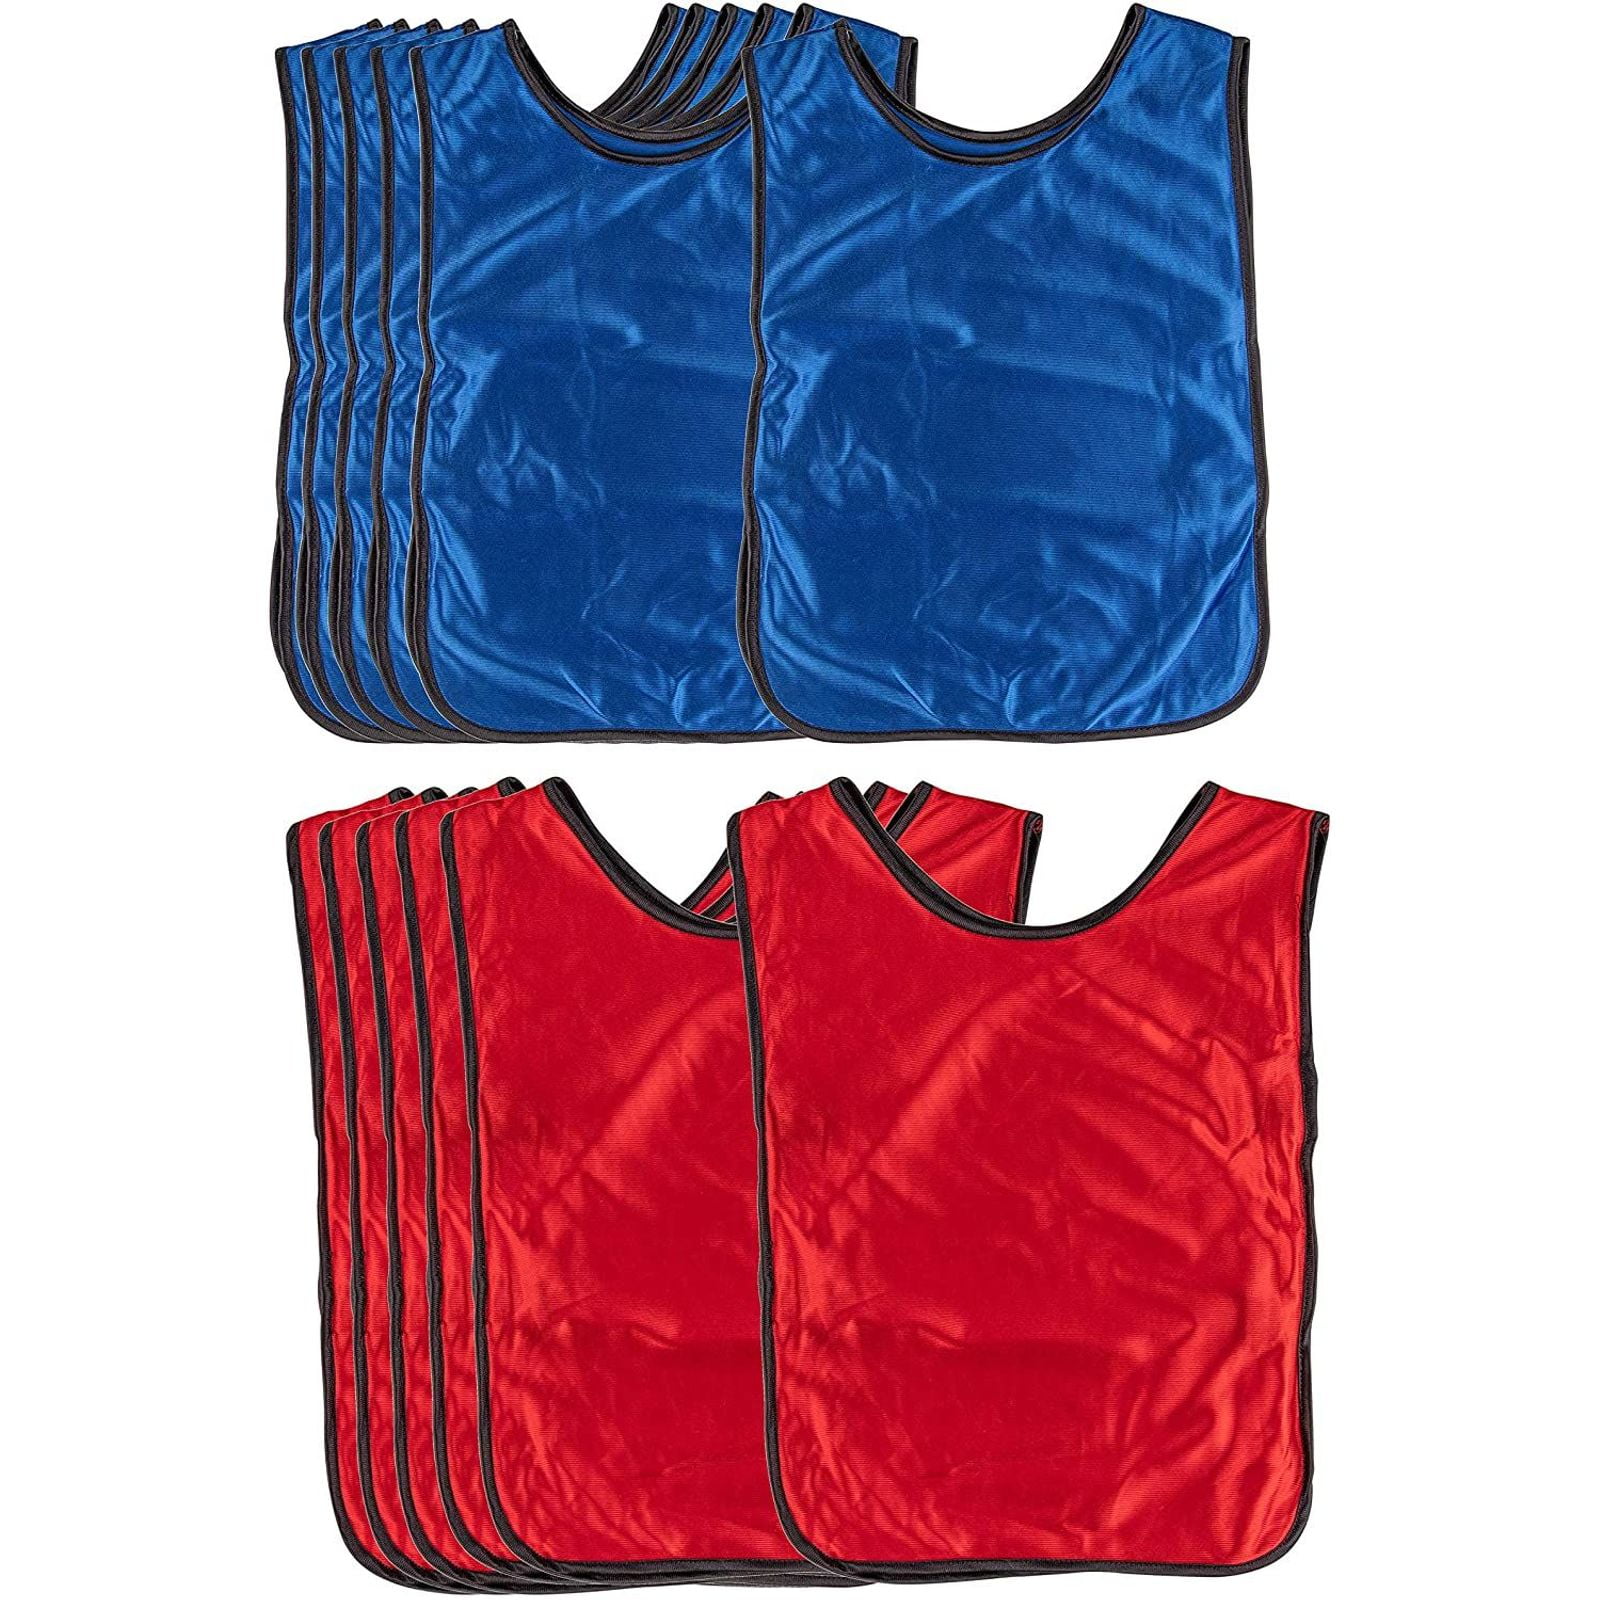 Football Team Basketball Training for Kids Youth and Adults Soccer Pennies 12 Pack Sports Pinnies Scrimmage Vests SportZonne Small – Ages 3-5 